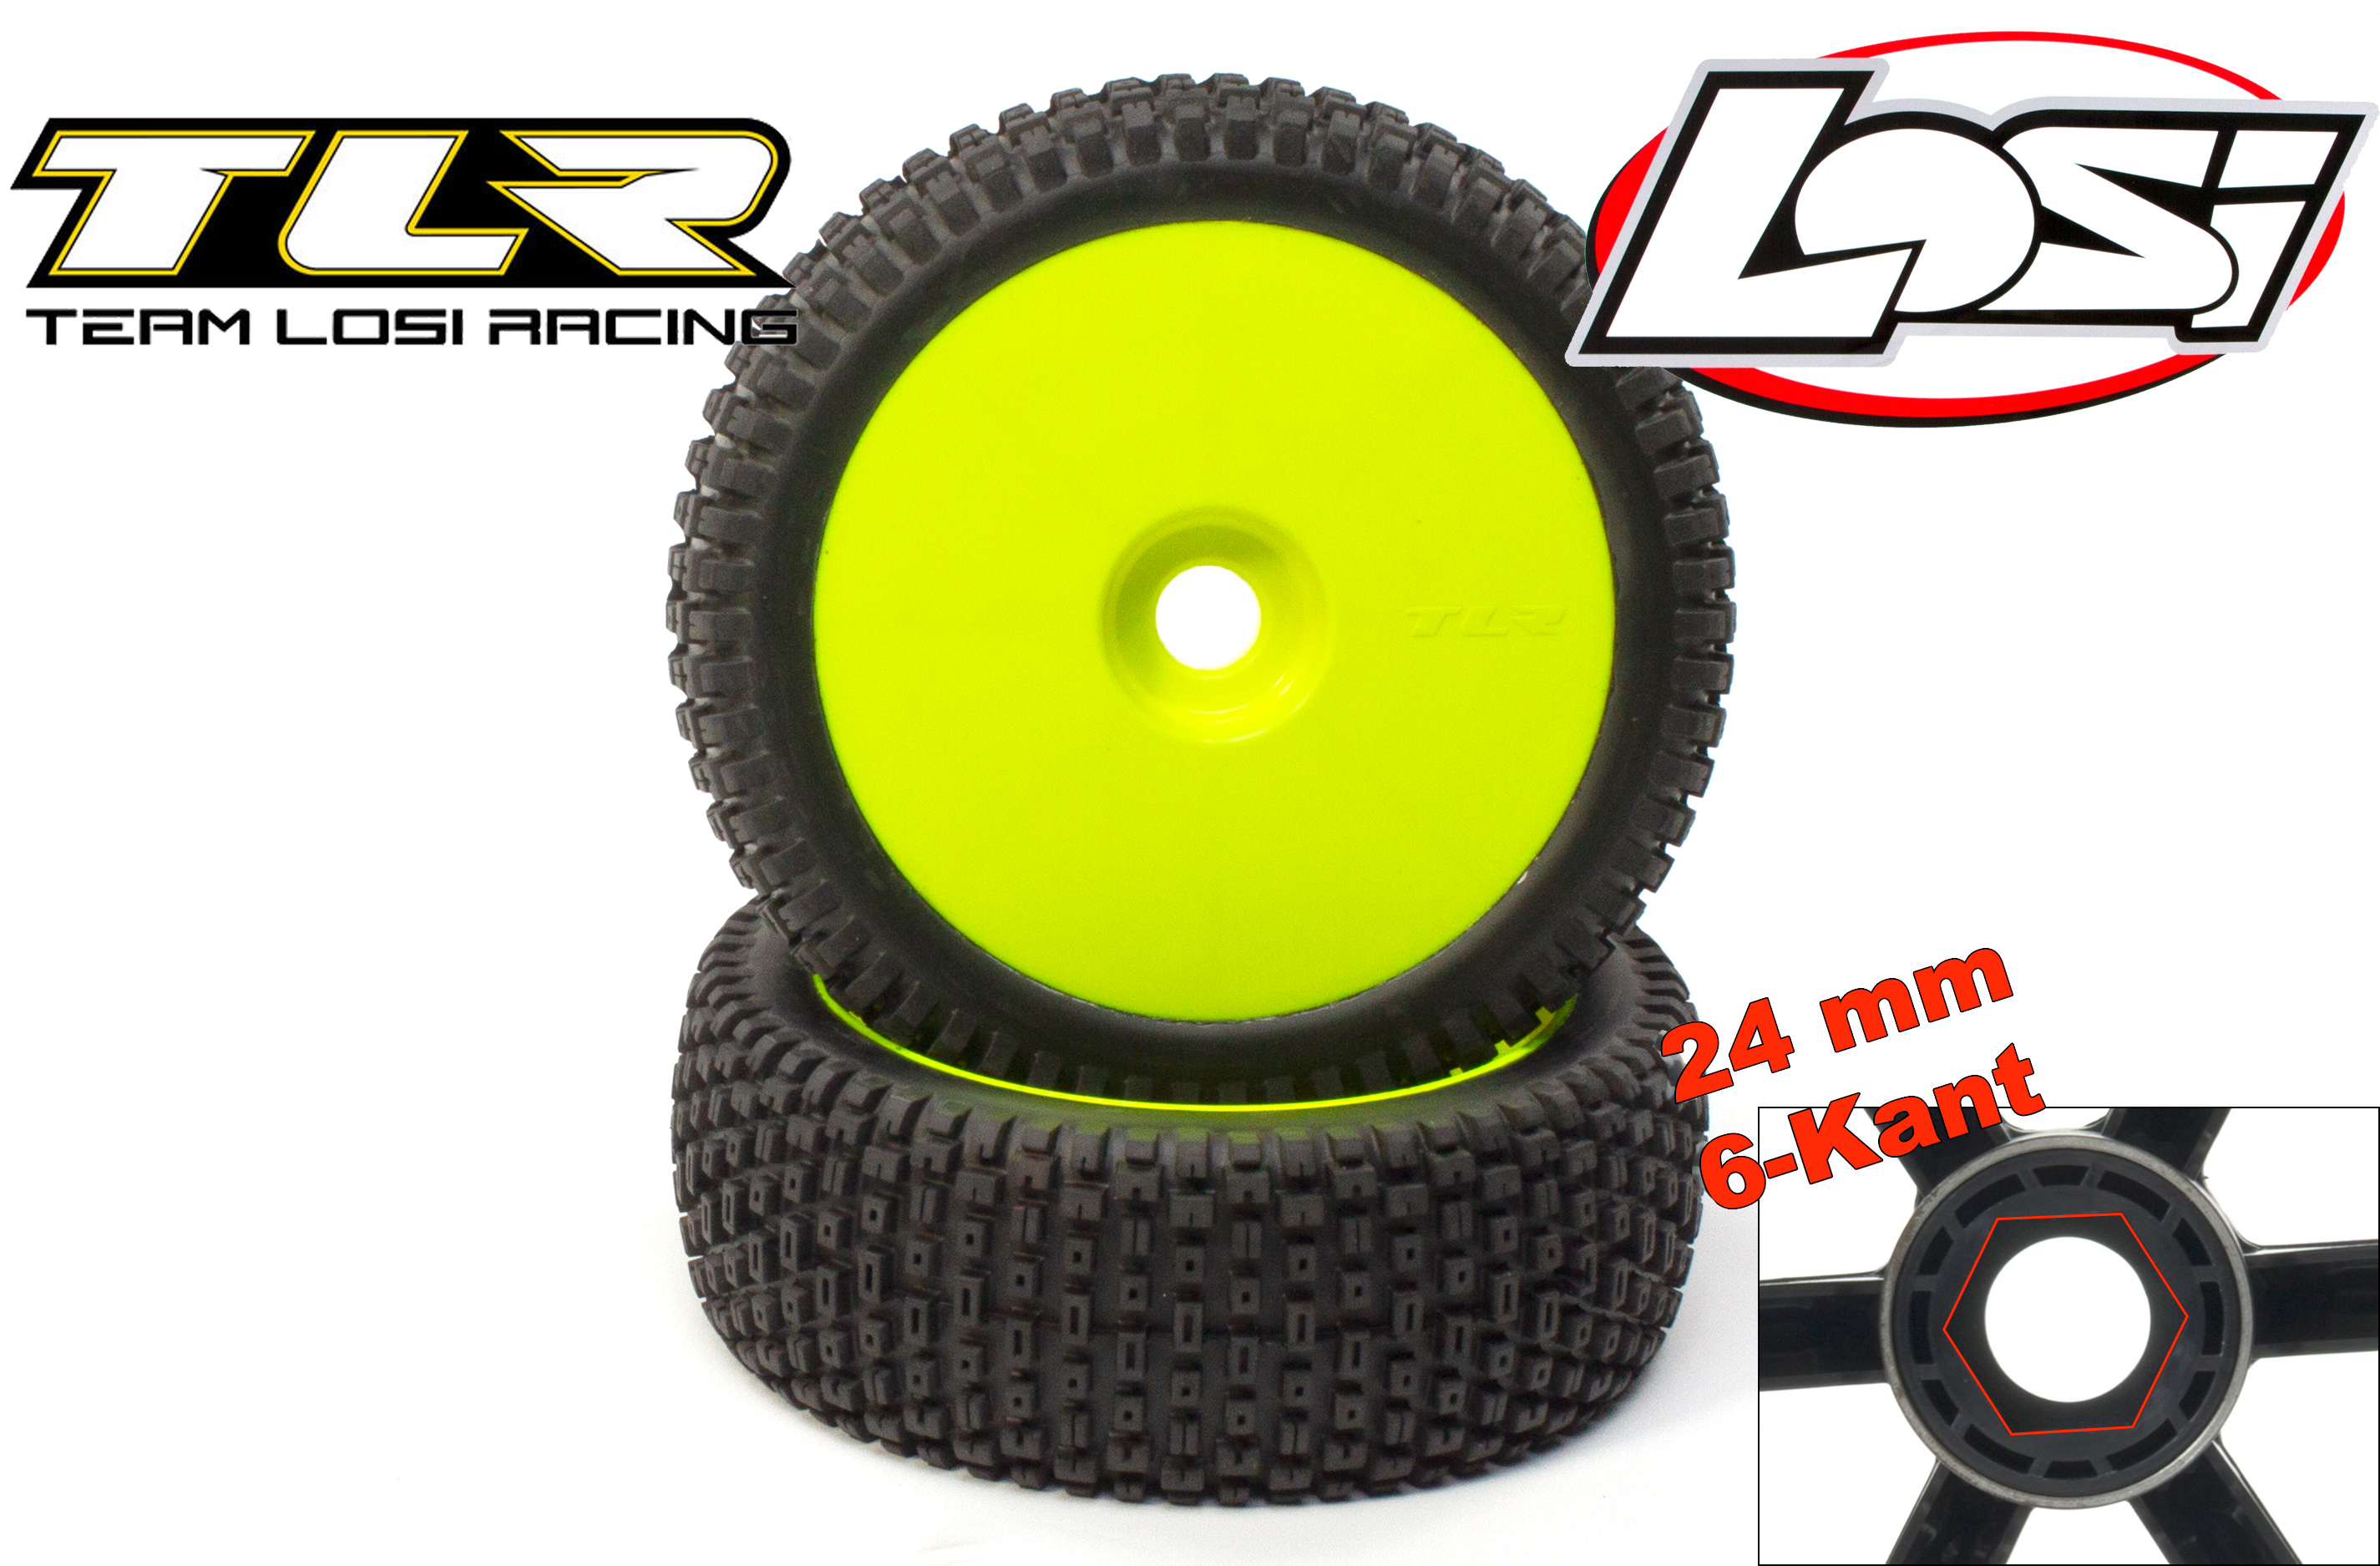 TLR45004 Losi TLR Race tire with insert and rim, original Losi